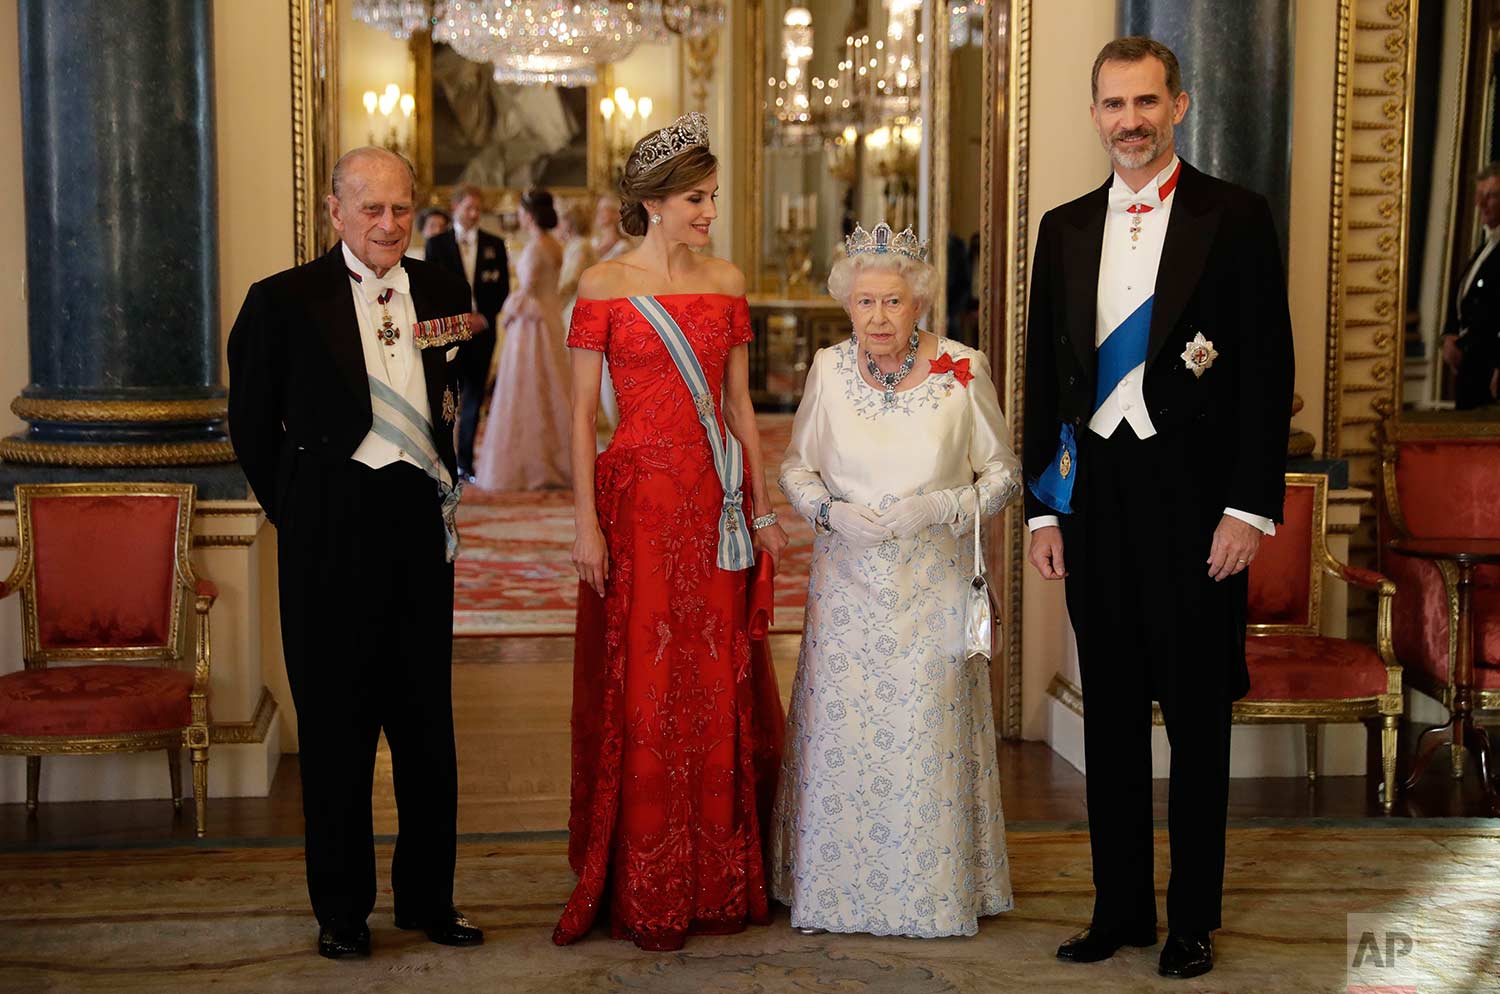 Queen Elizabeth II, her husband Prince Philip, Spain's King Felipe and his wife, Queen Letizia, pose for a group photograph before a State Banquet at Buckingham Palace in London, Wednesday, July 12, 2017. (AP Photo/Matt Dunham, Pool)